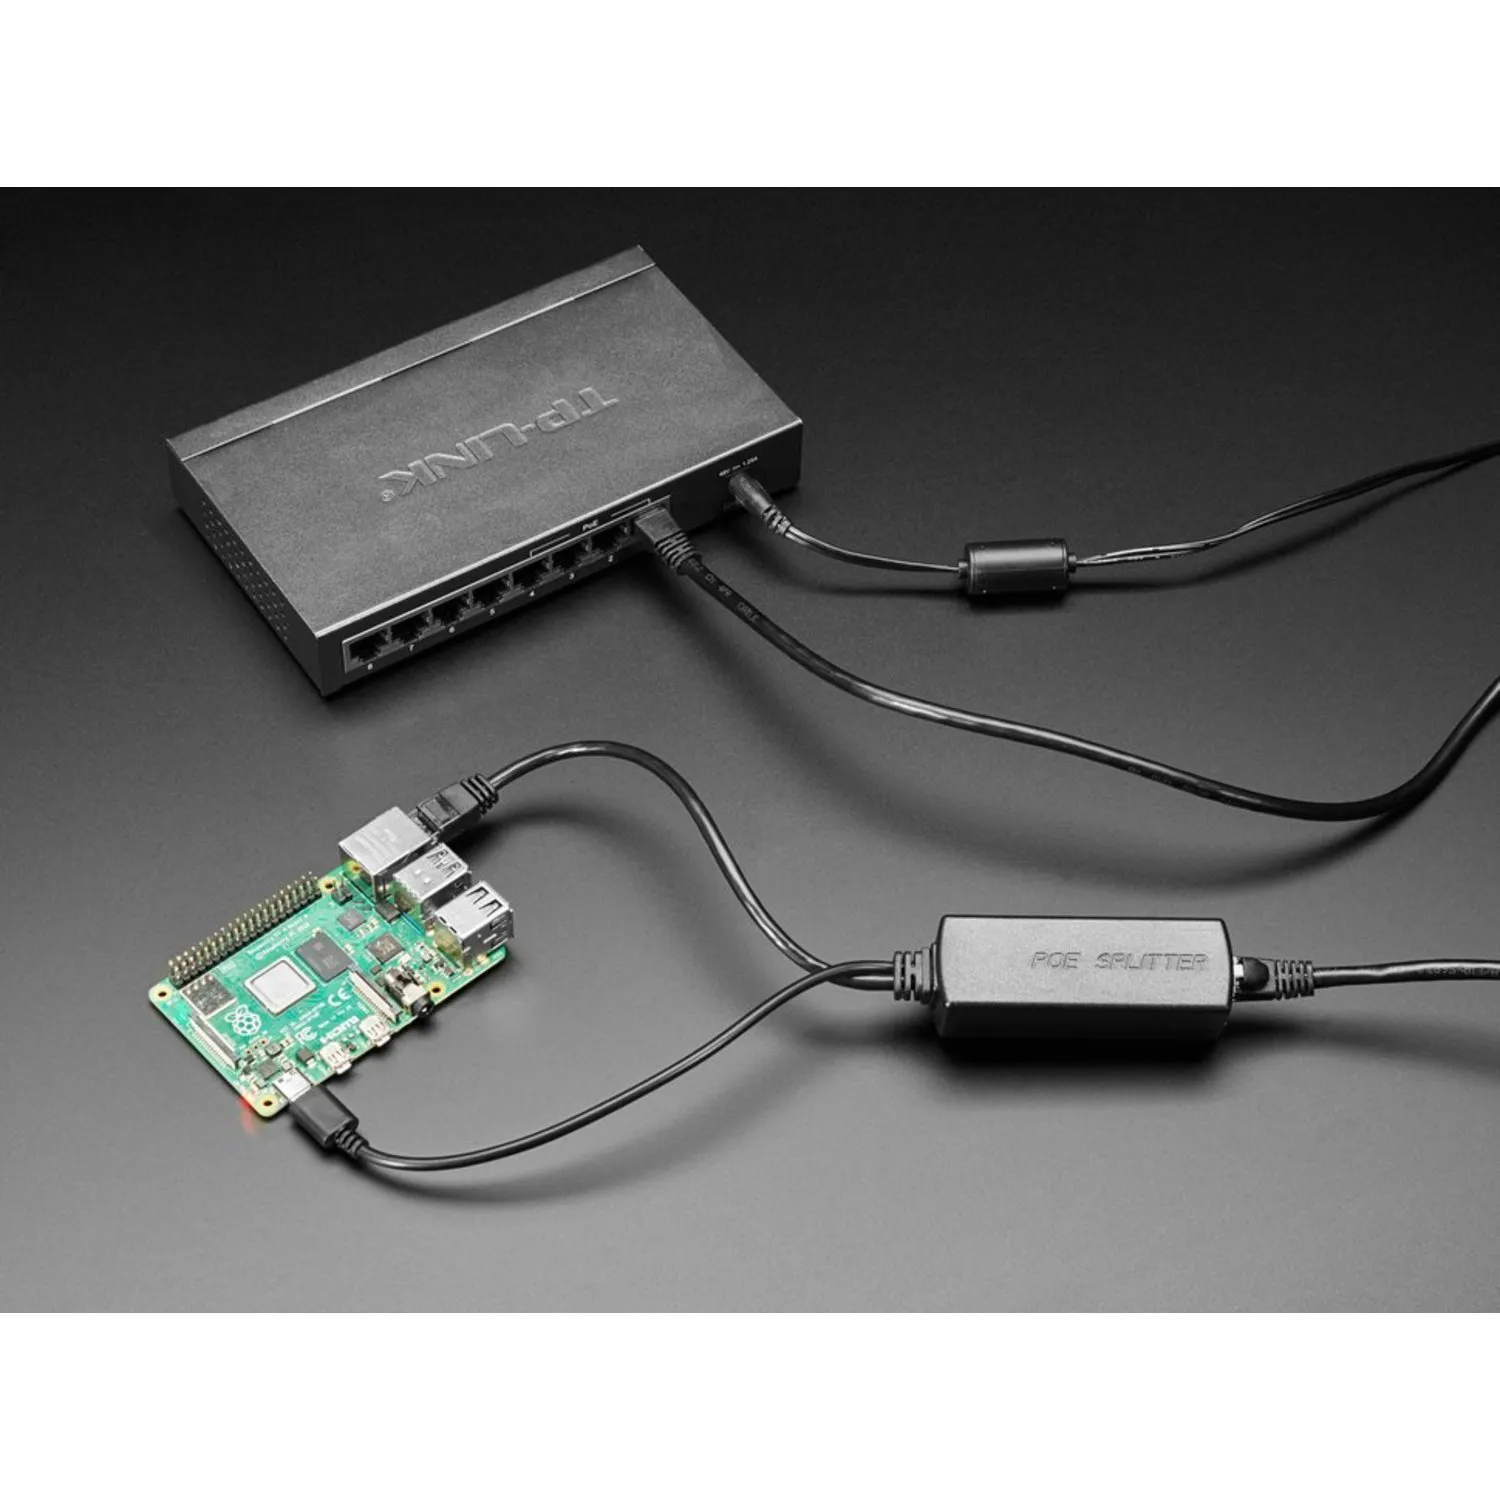 Photo of PoE Splitter with USB Type C - 5V 2A - 100 MB Ethernet